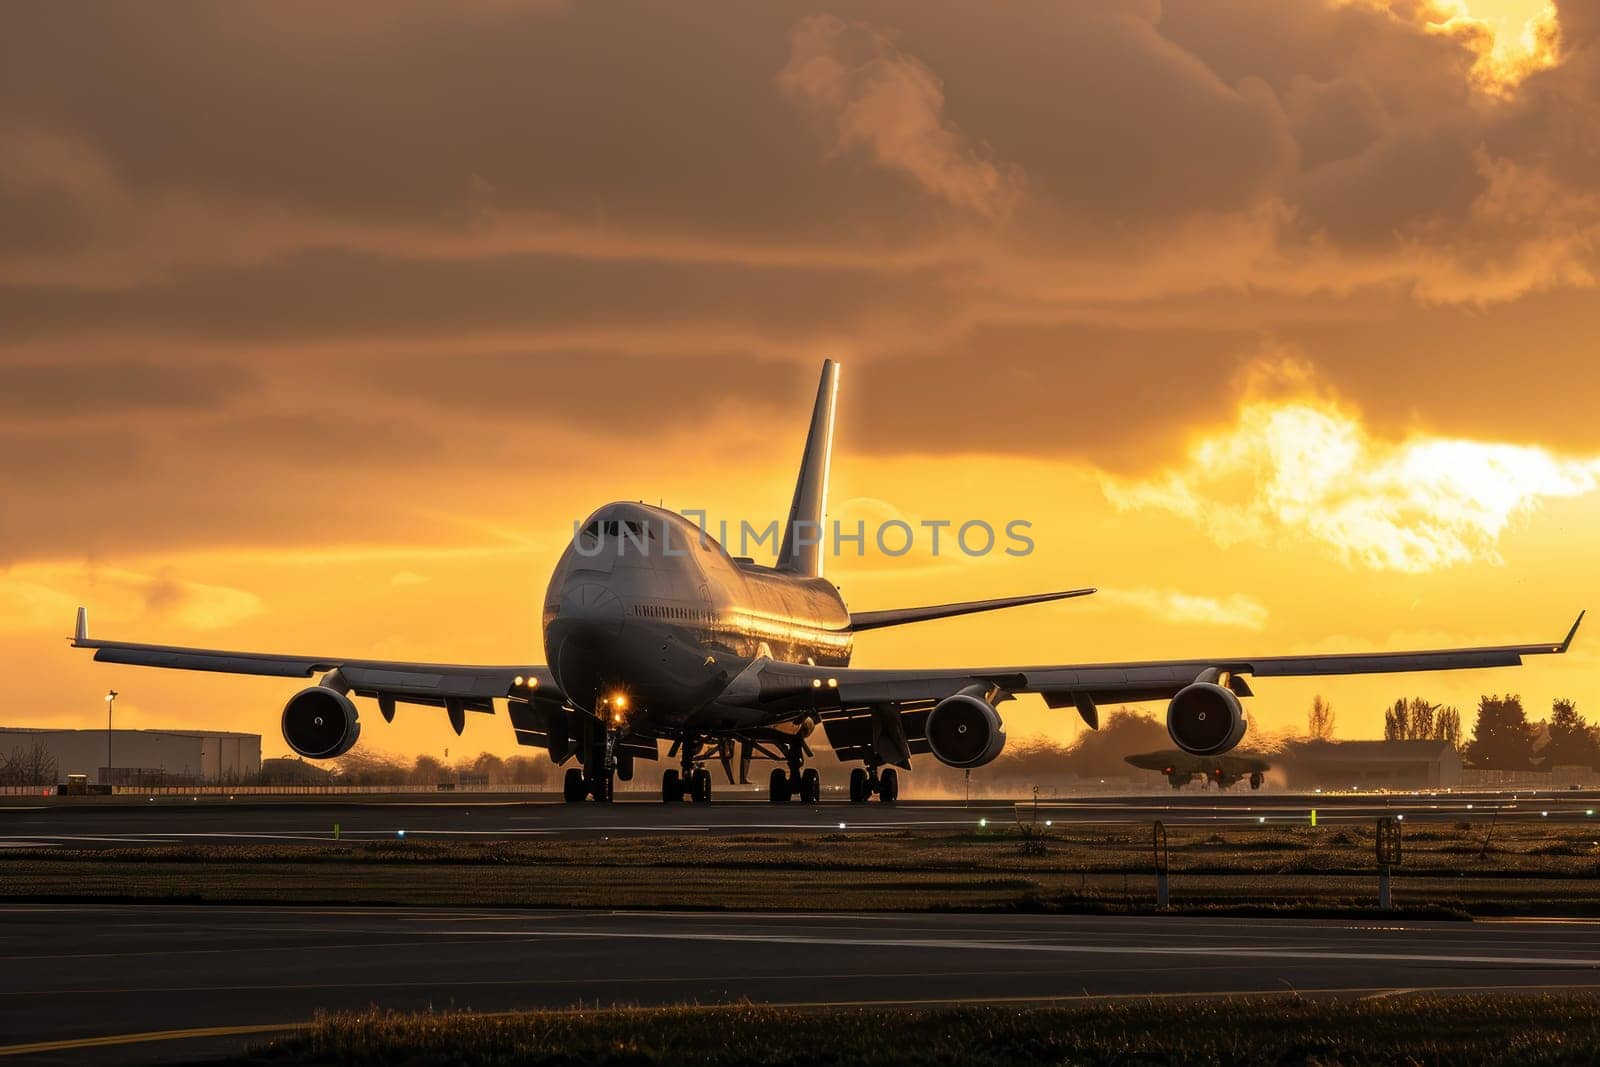 A majestic airplane illuminated by the setting sun as it prepares for takeoff on a runway. by Chawagen